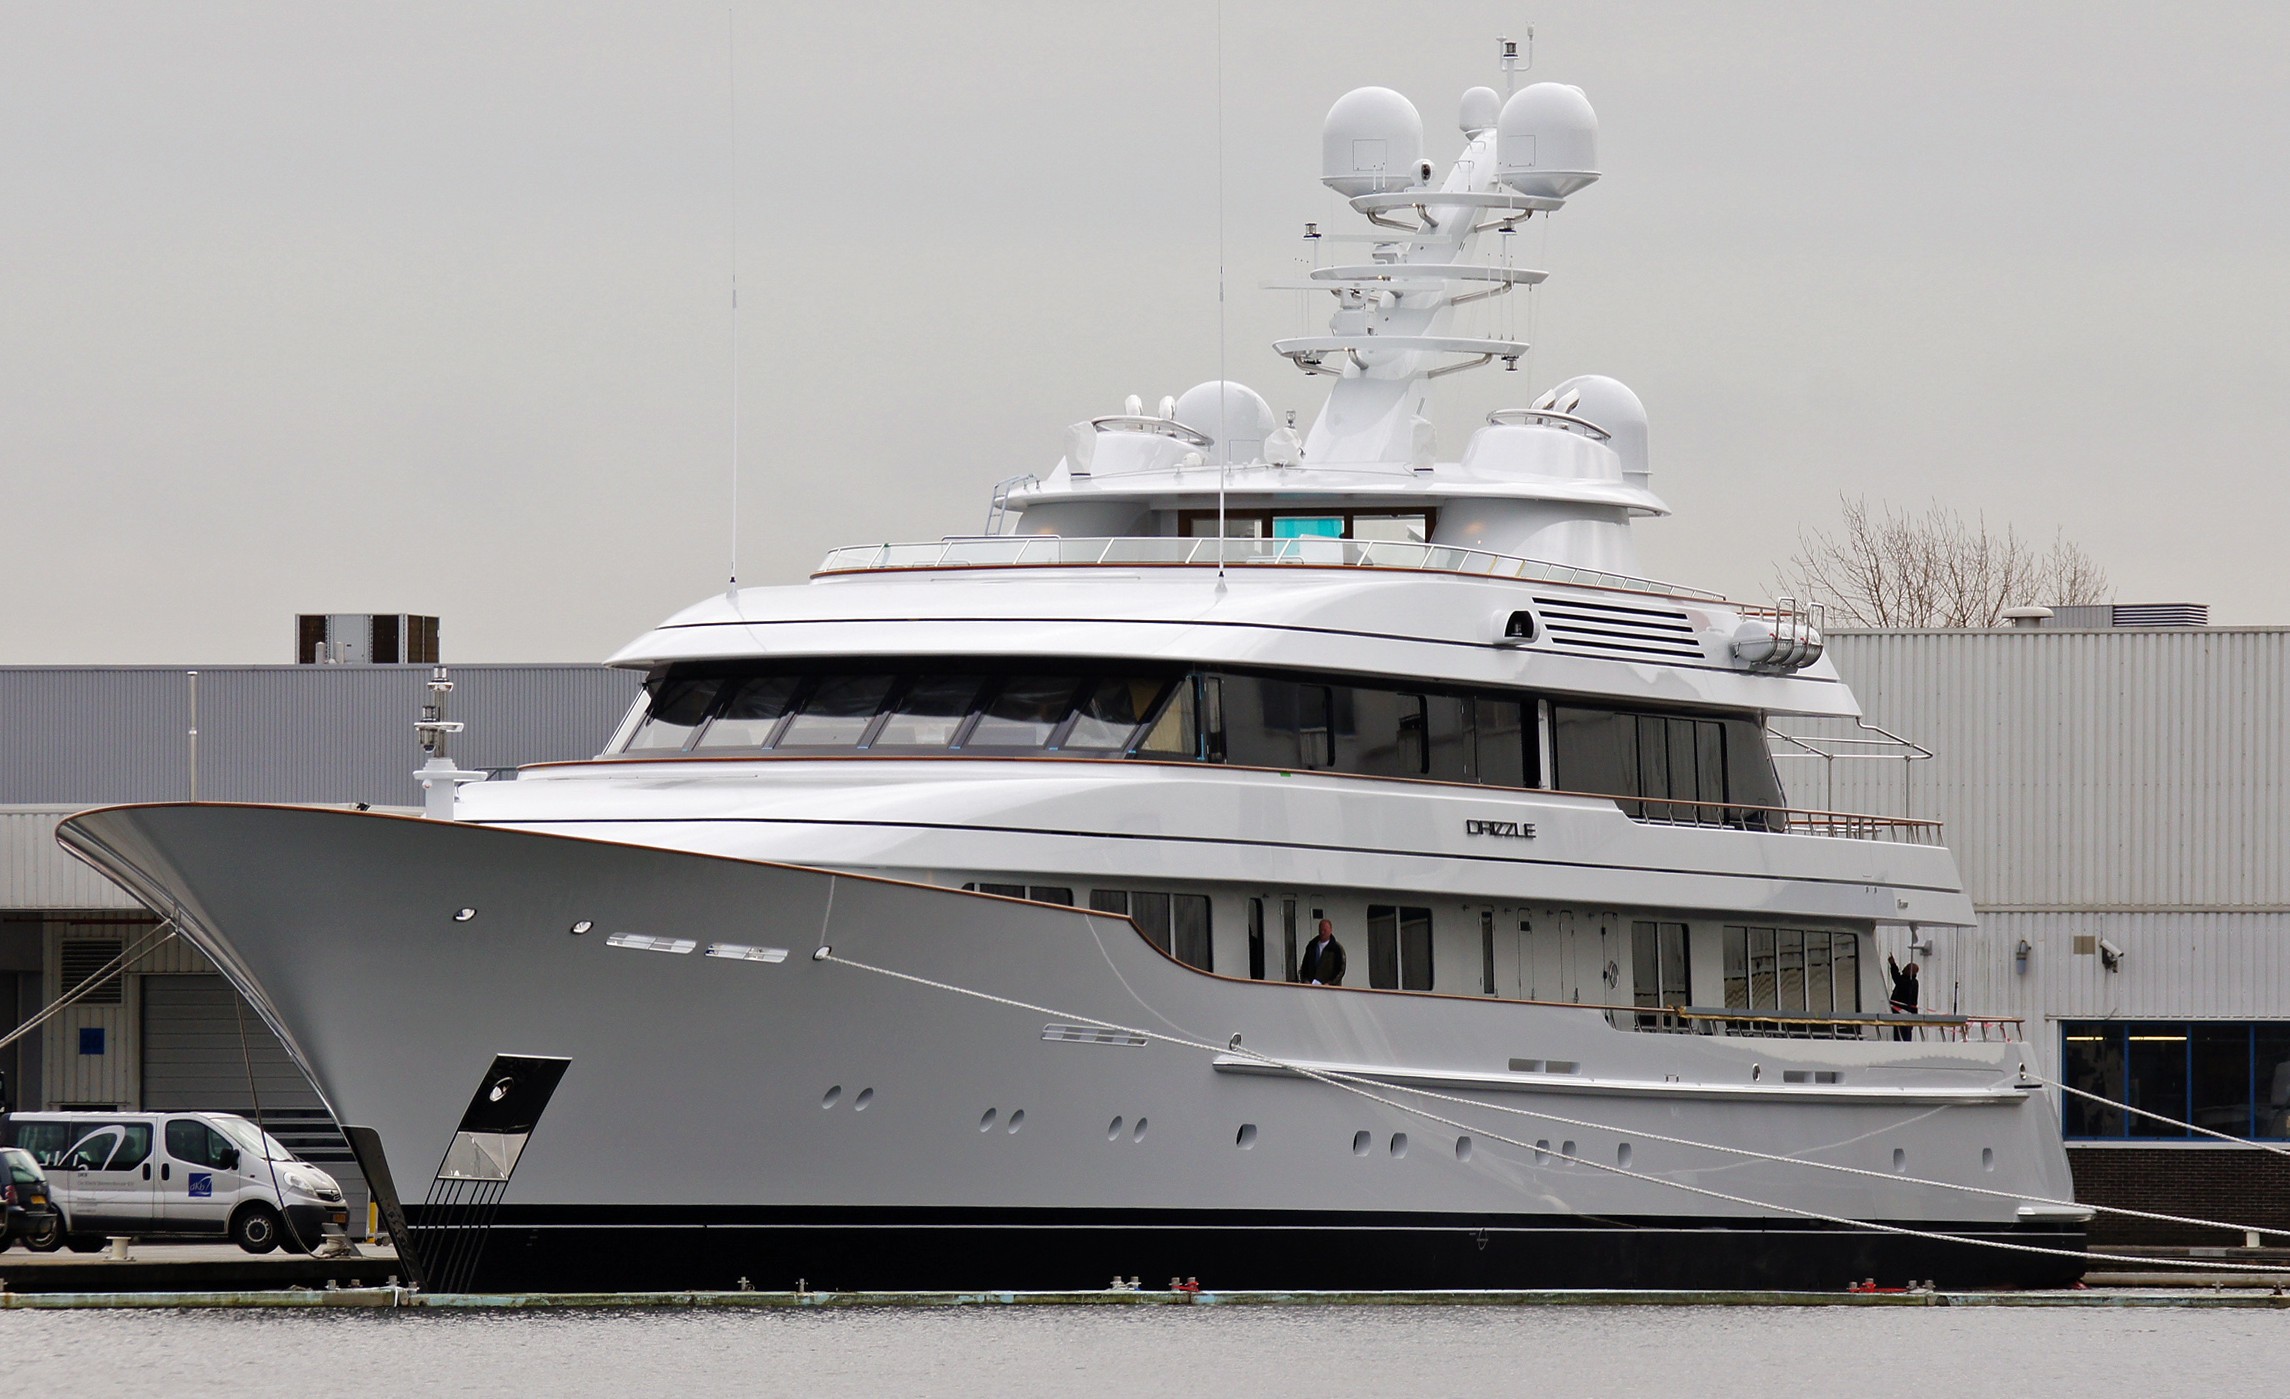 who owns yacht drizzle